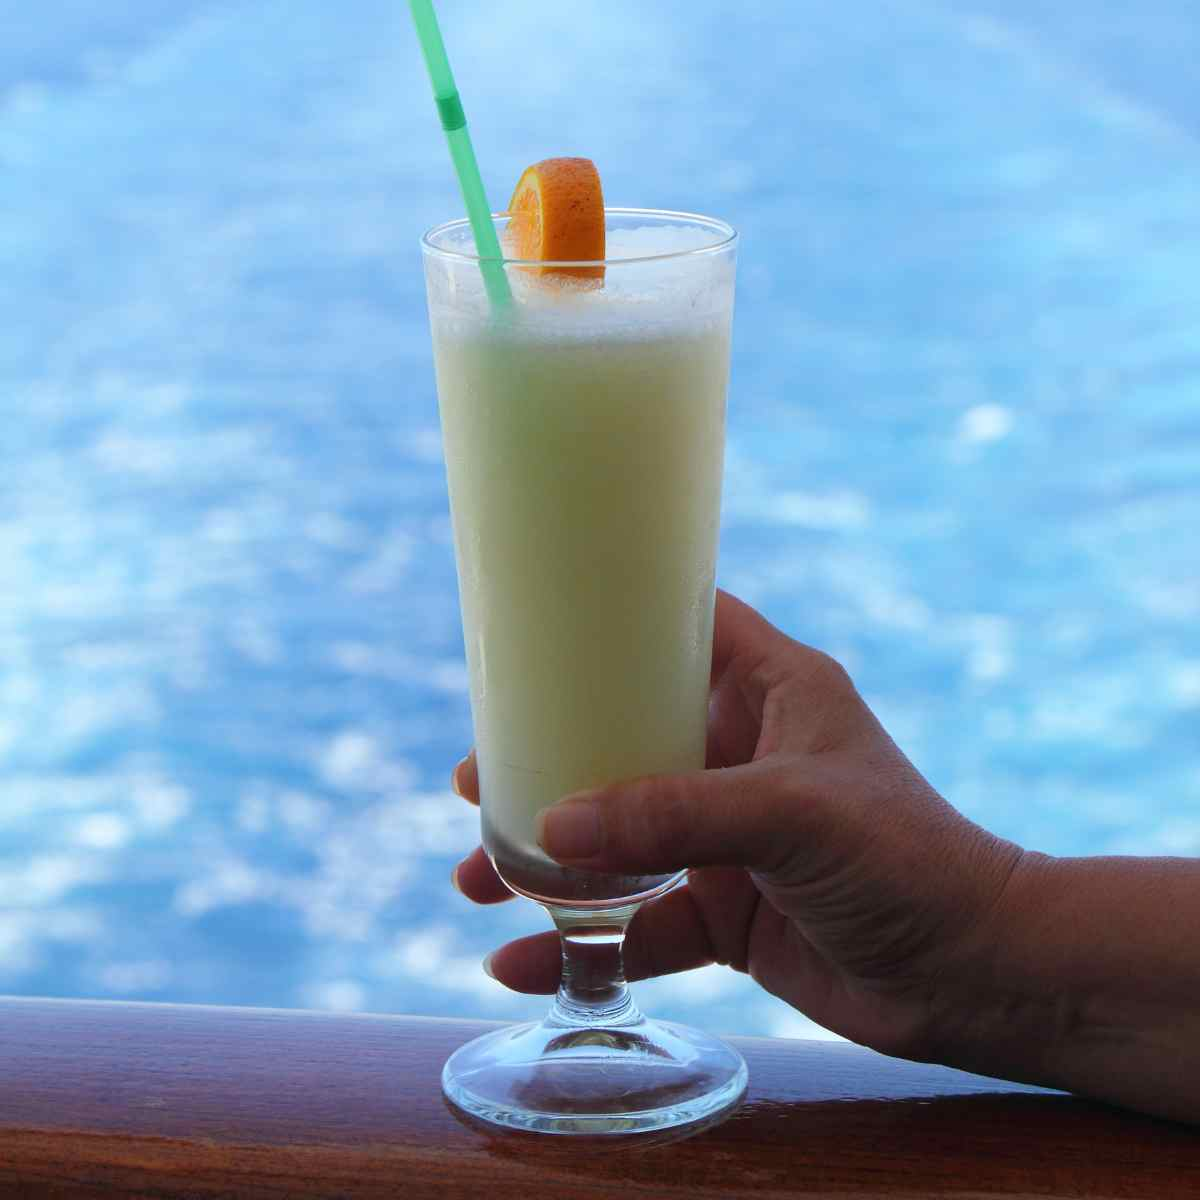 Drink on a Ship - Featured In: Royal Caribbean Beverage Packages